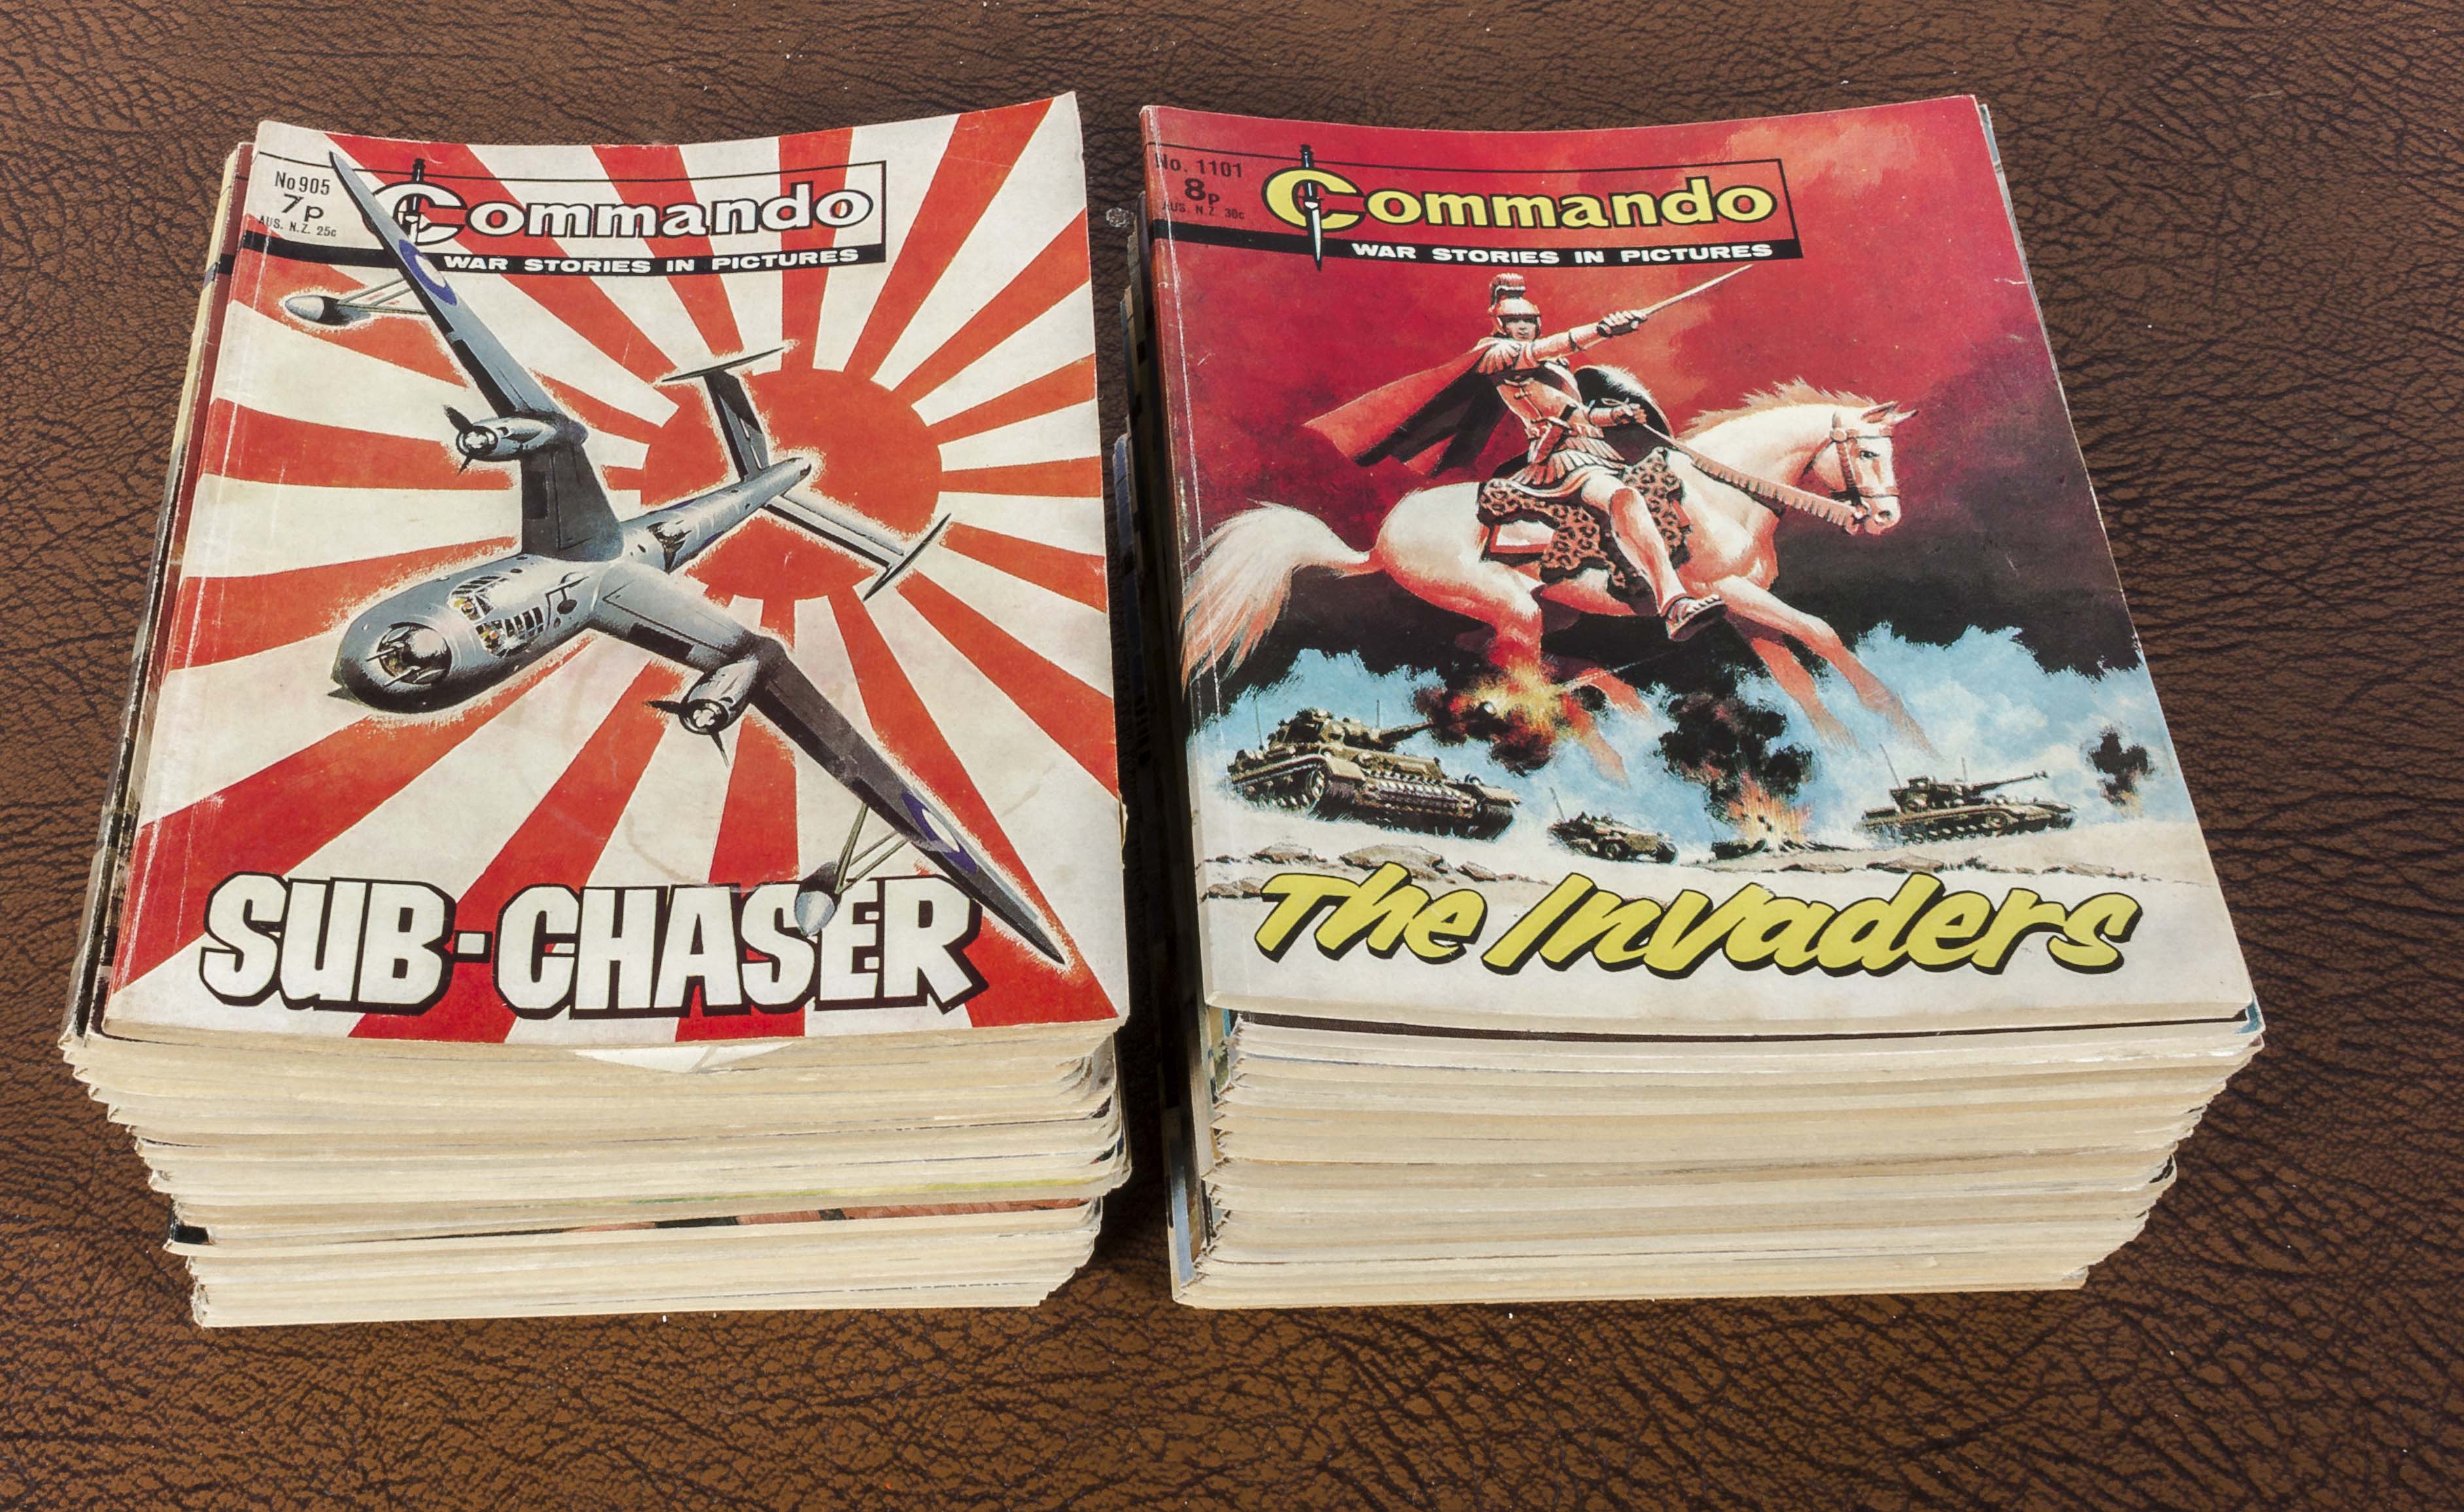 A collection of Commando comic books 53 issues